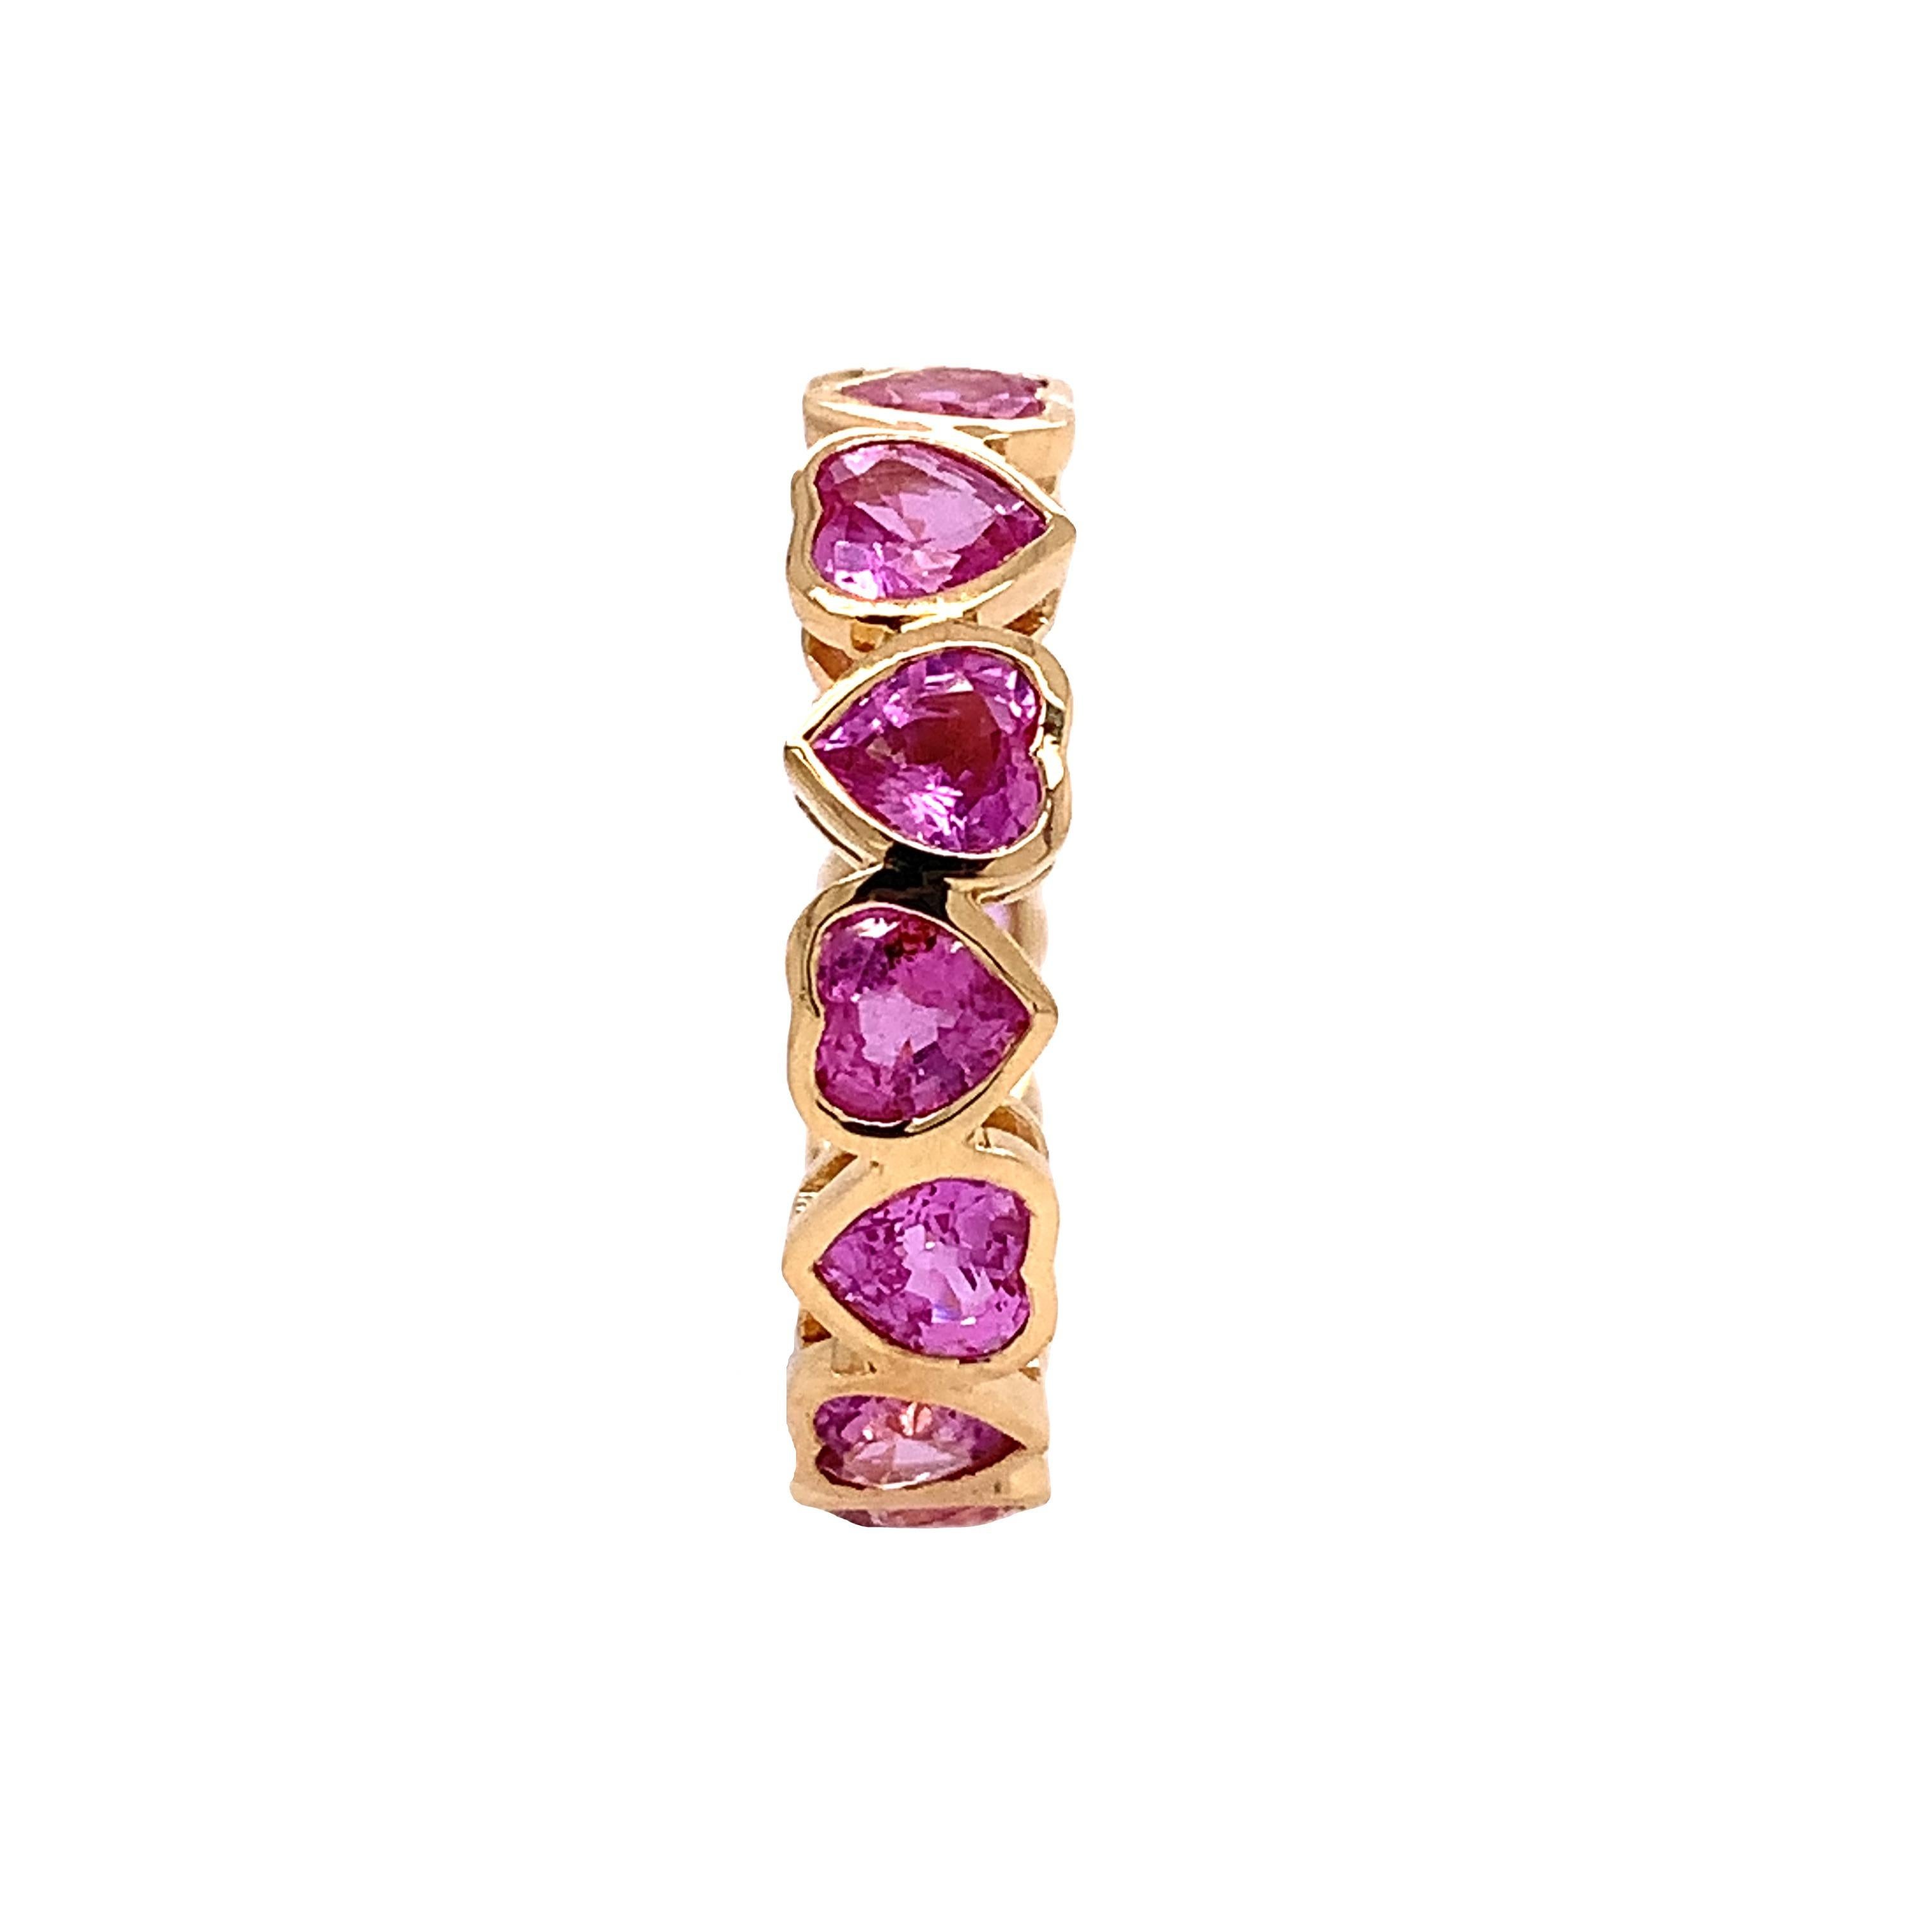 18K Yellow Gold
Pink Sapphire: 4.13ct total weight.